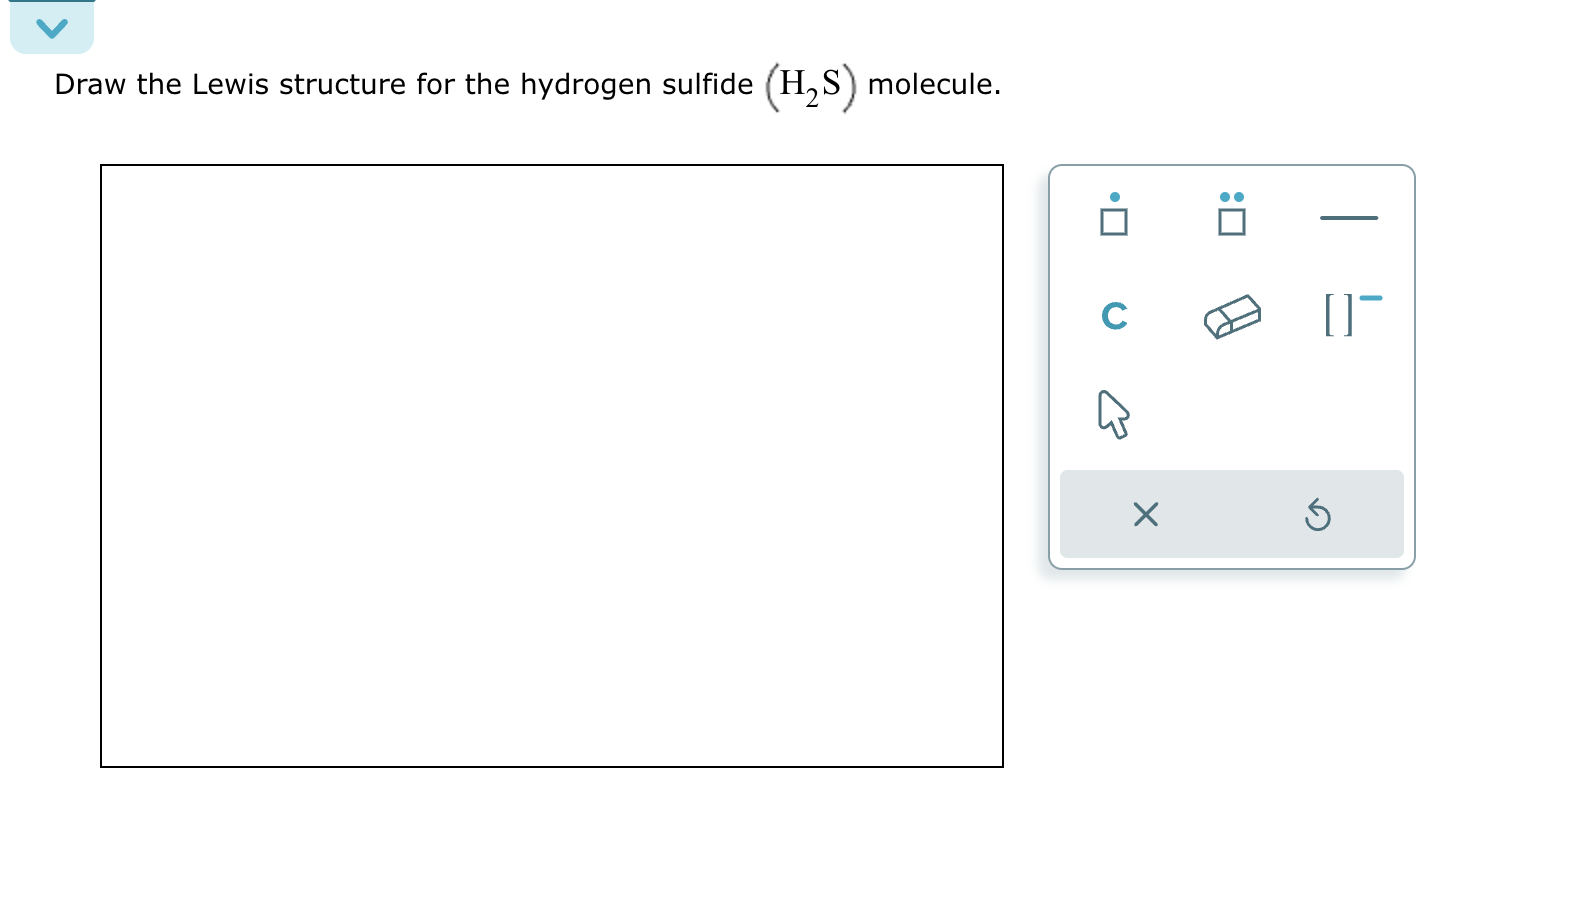 SOLVED Draw the Lewis structure for the hydrogen sulfide (H2 S) molecule.